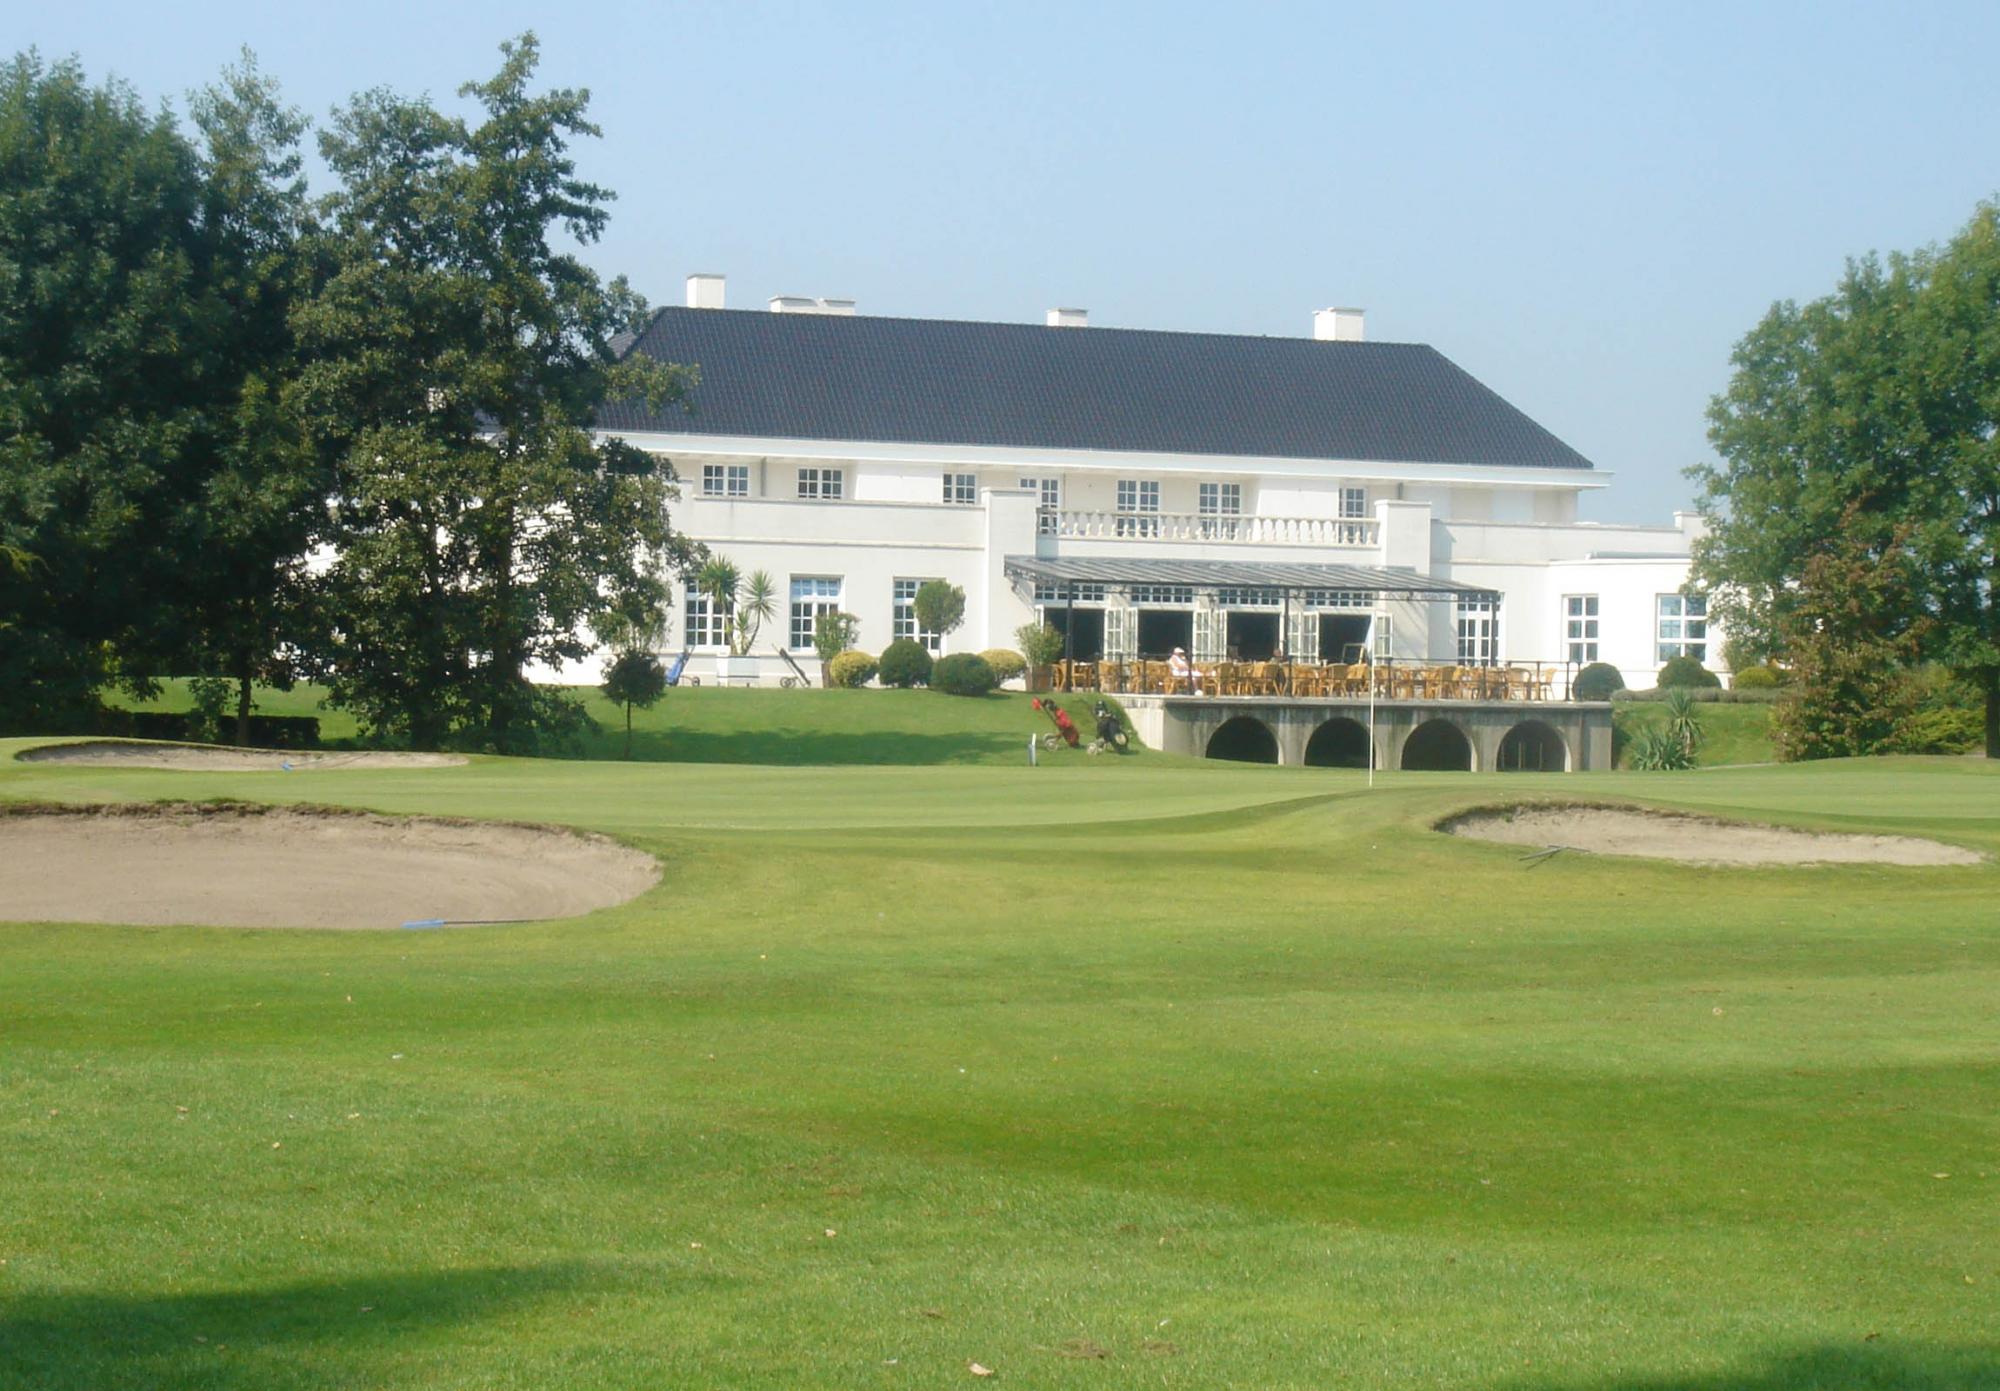 The Golf Club Oostburg's picturesque golf course situated in impressive Bruges  Ypres.